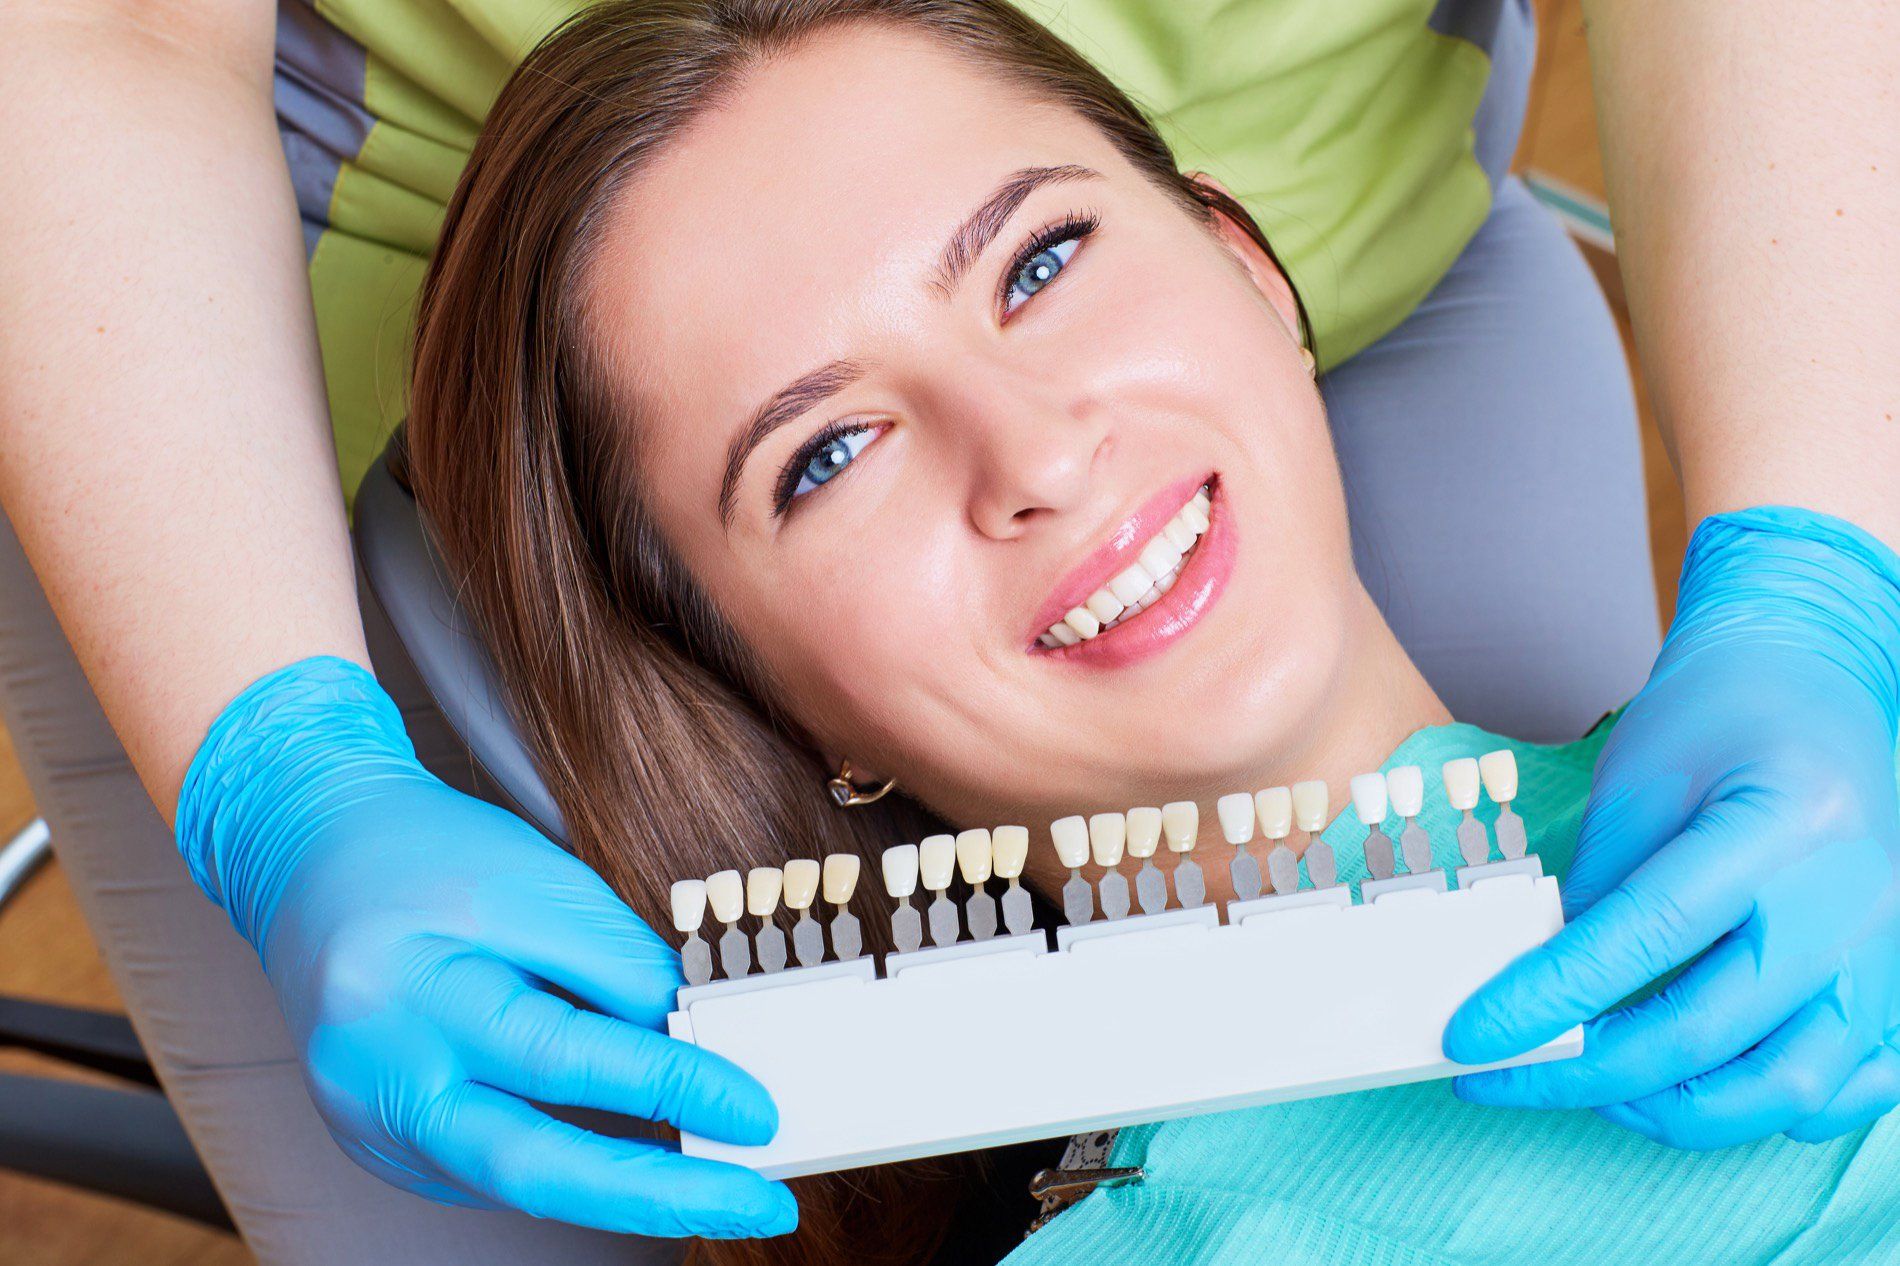 Woman selecting dental implants at dentist's office